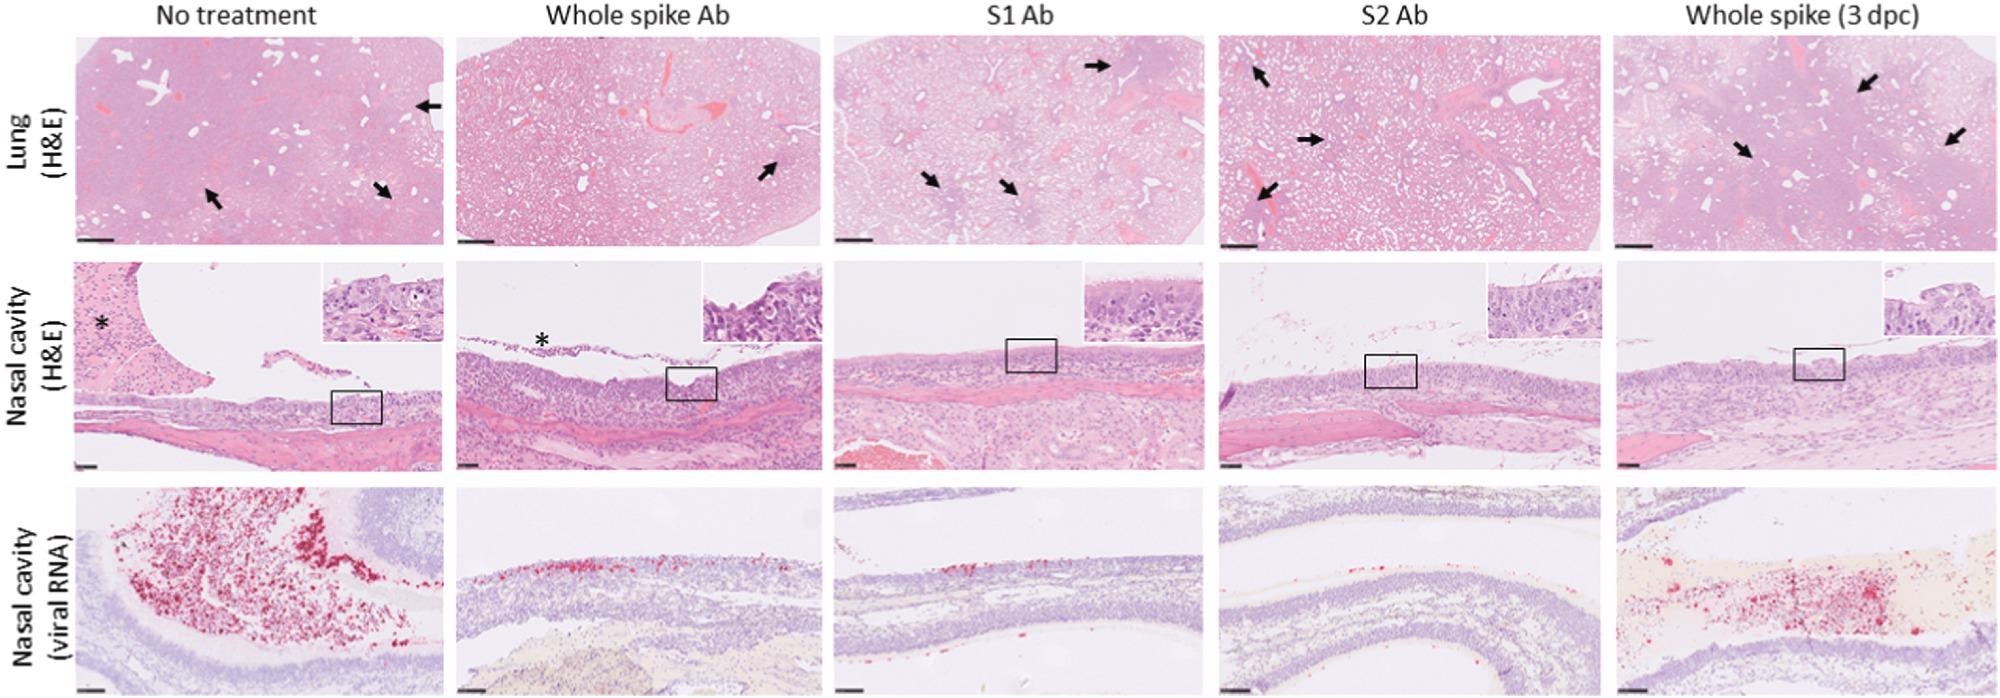 Representative microscopic images of lungs and nasal cavities of hamsters receiving ovine antibody preparations after challenge with SARS-CoV-2. Top row, lung-multifocal to patchy areas of pneumonic consolidation (arrows) (H&E); middle row, nasal cavity-inflammation and degeneration of the mucosa with variable luminal exudate (asterisks). Inset, higher power images of nasal epithelium (×800 magnification) (H&E); lower row, nasal cavity-staining for SARS-CoV-2 viral RNA in the mucosa and luminal exudate (in situ hybridization).